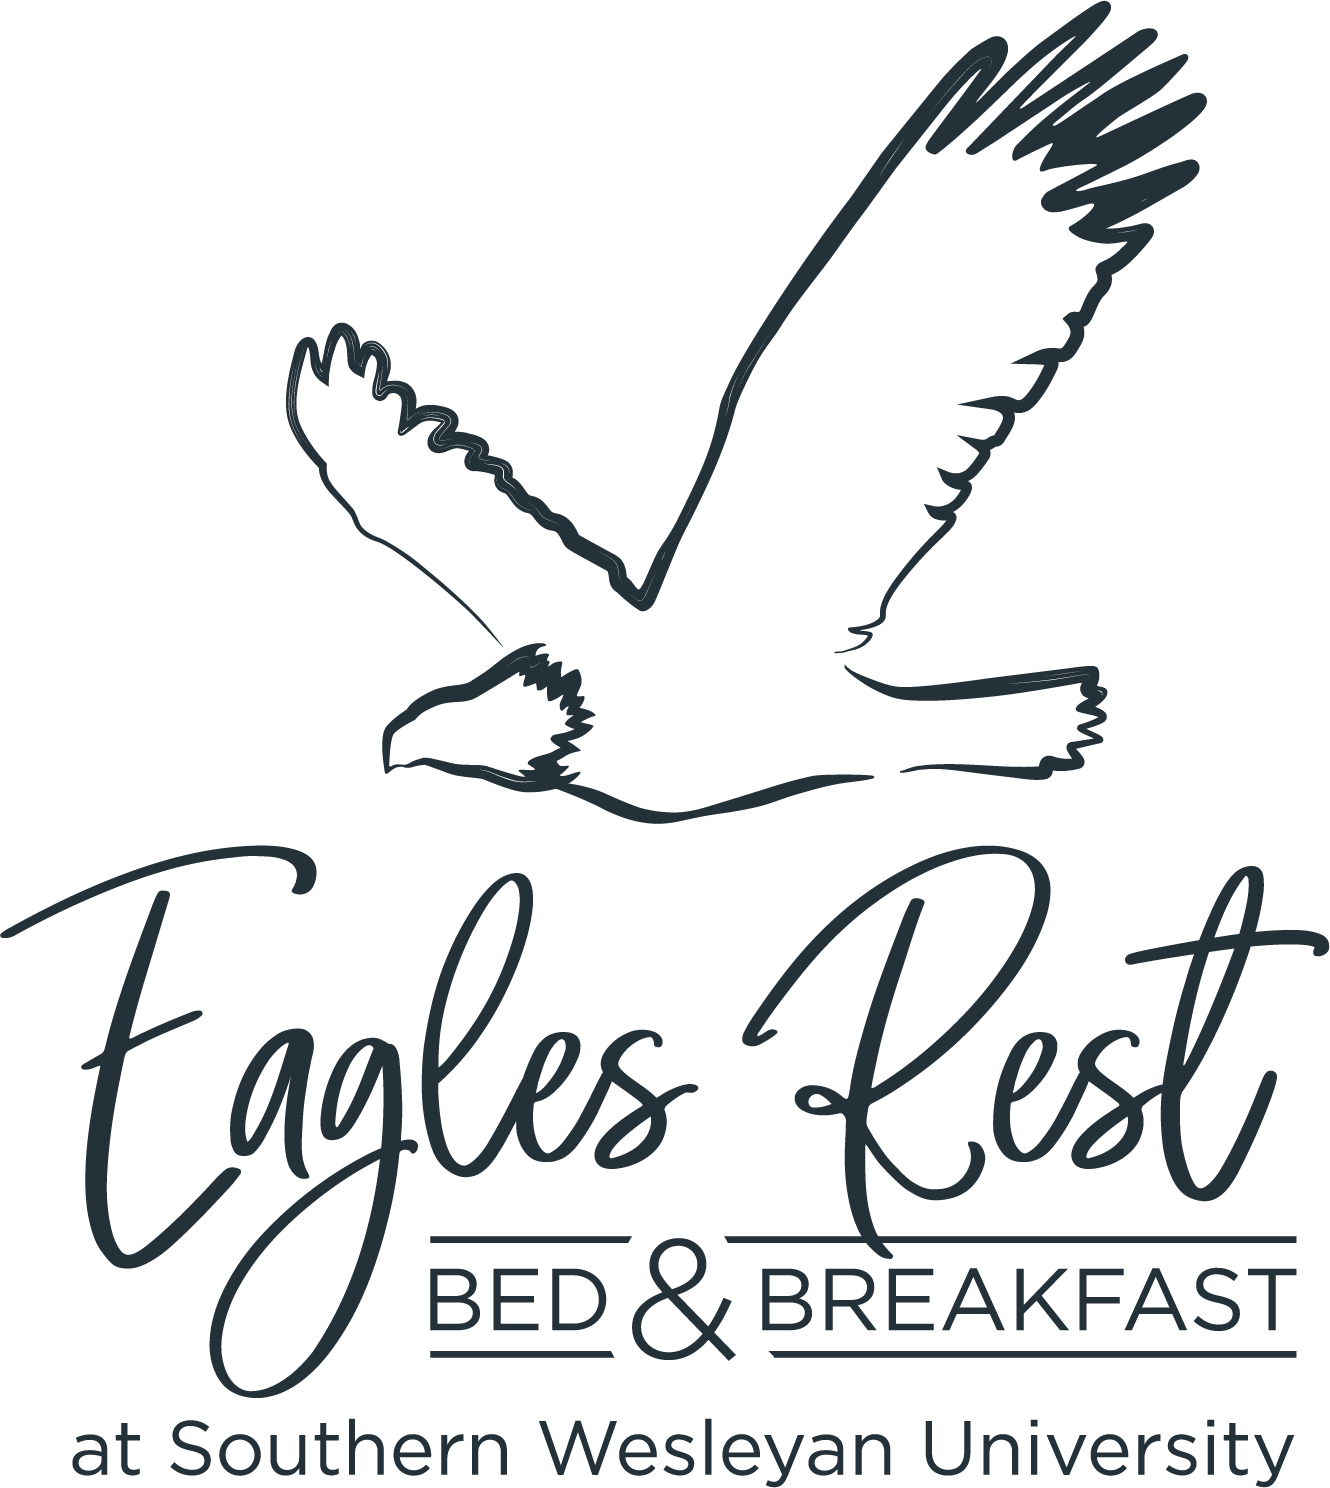 Eagles Rest Bed and Breakfast